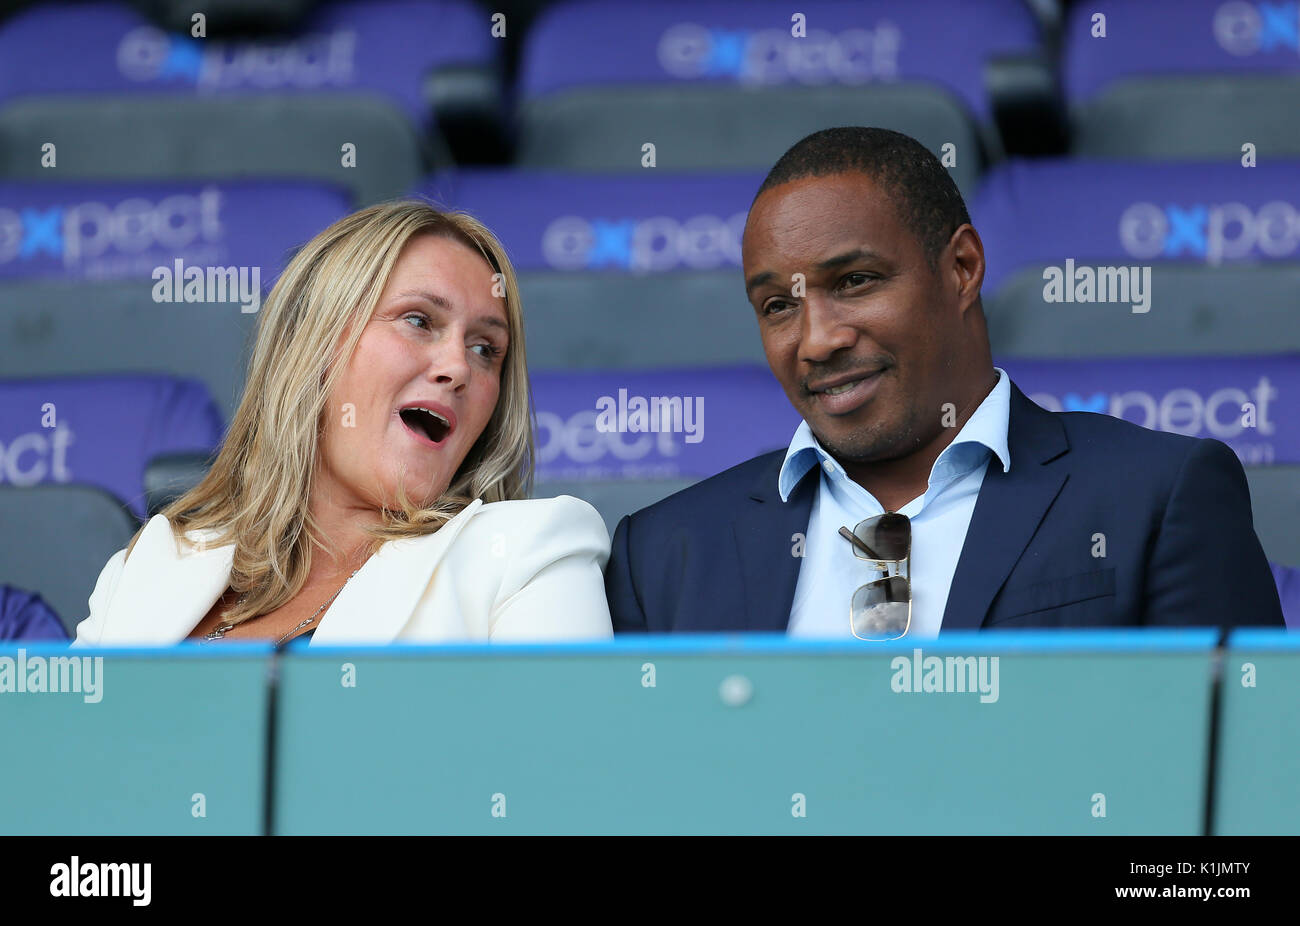 Paul Ince and wife Claire in the stands during the Premier League match at the John Smith's Stadium, Huddersfield. Stock Photo